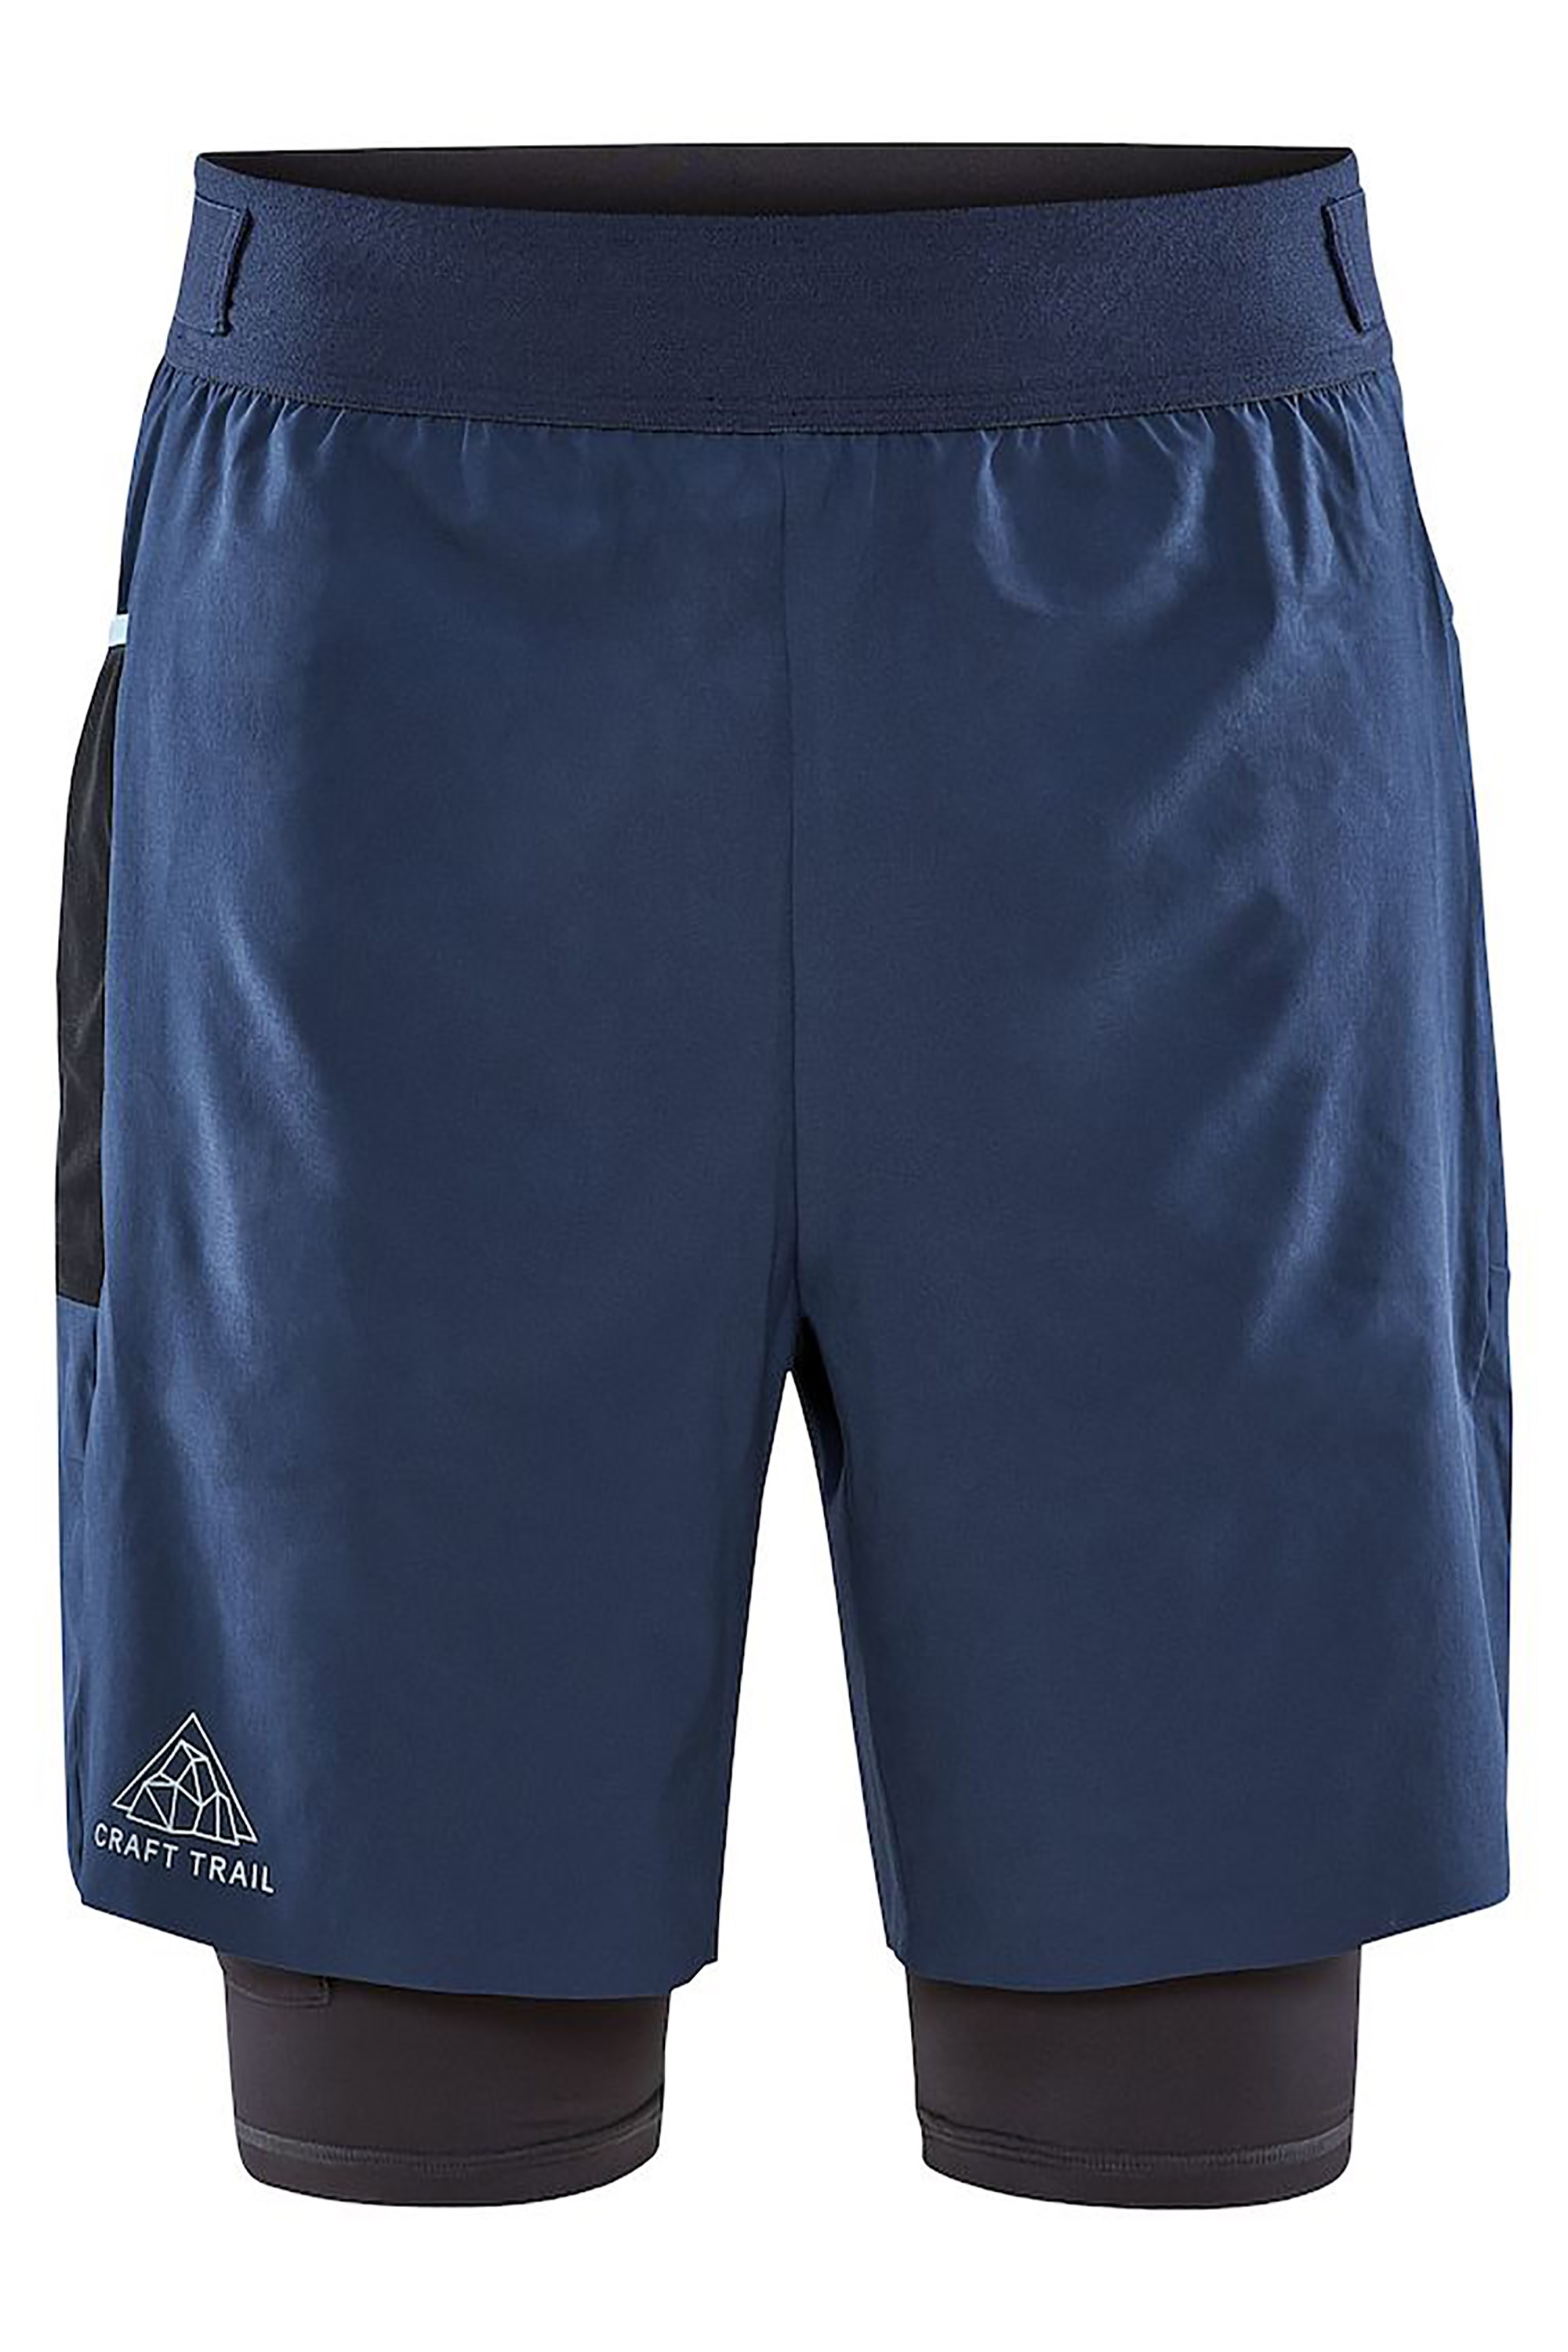 Pro Mens Trail 2-in-1 Shorts -